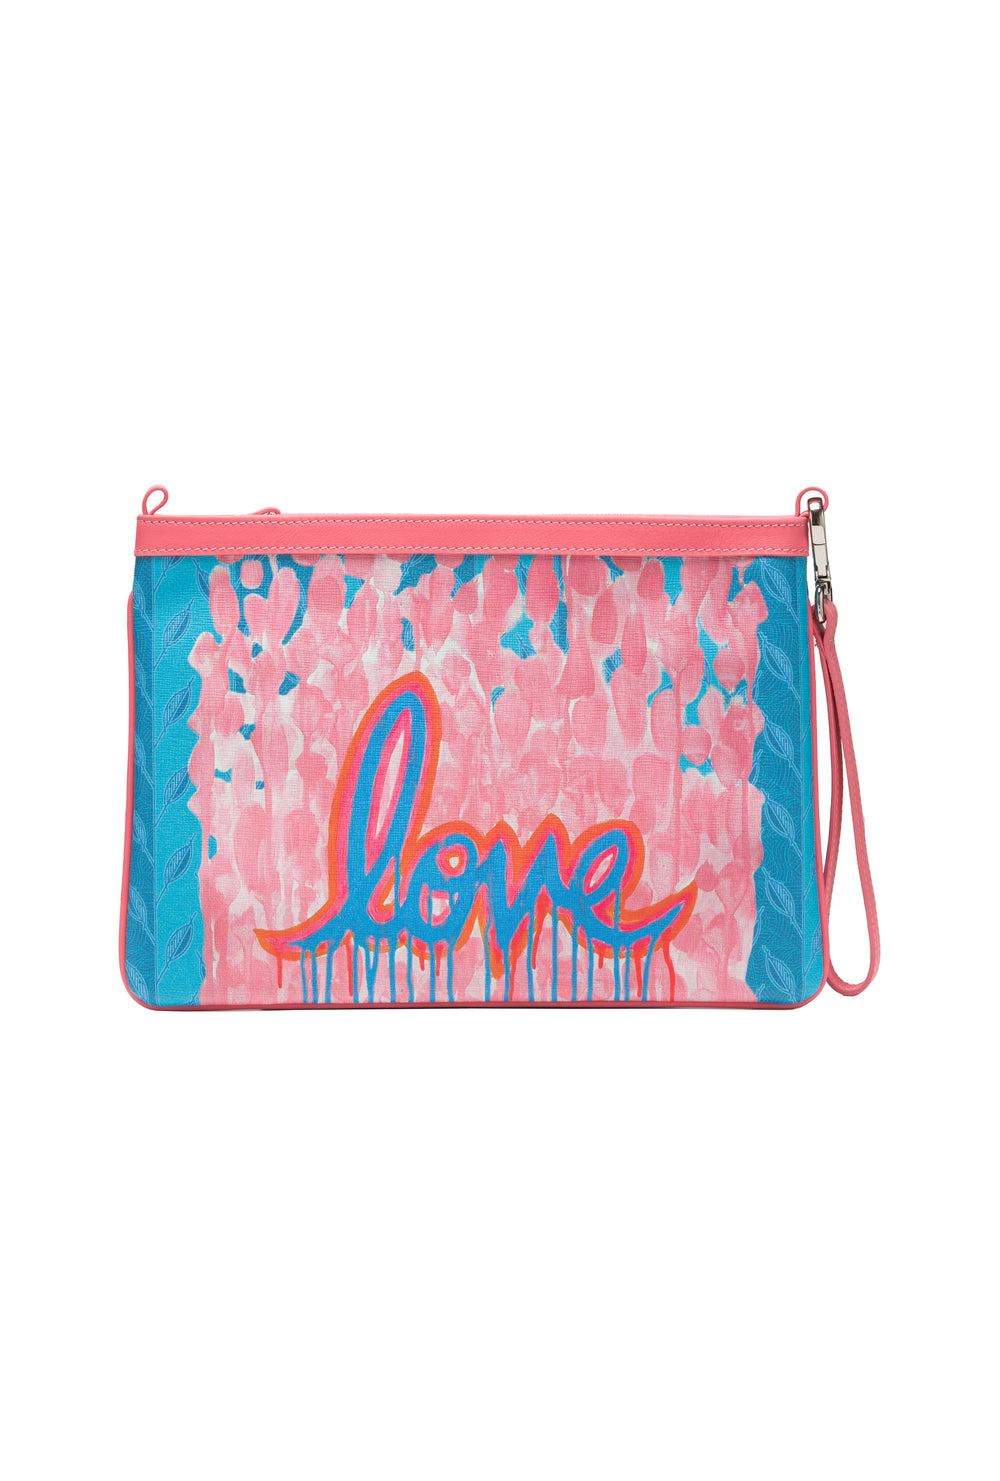 LOVE LETTERS ON LEAF MONOGRAM - LOVE CLUTCH